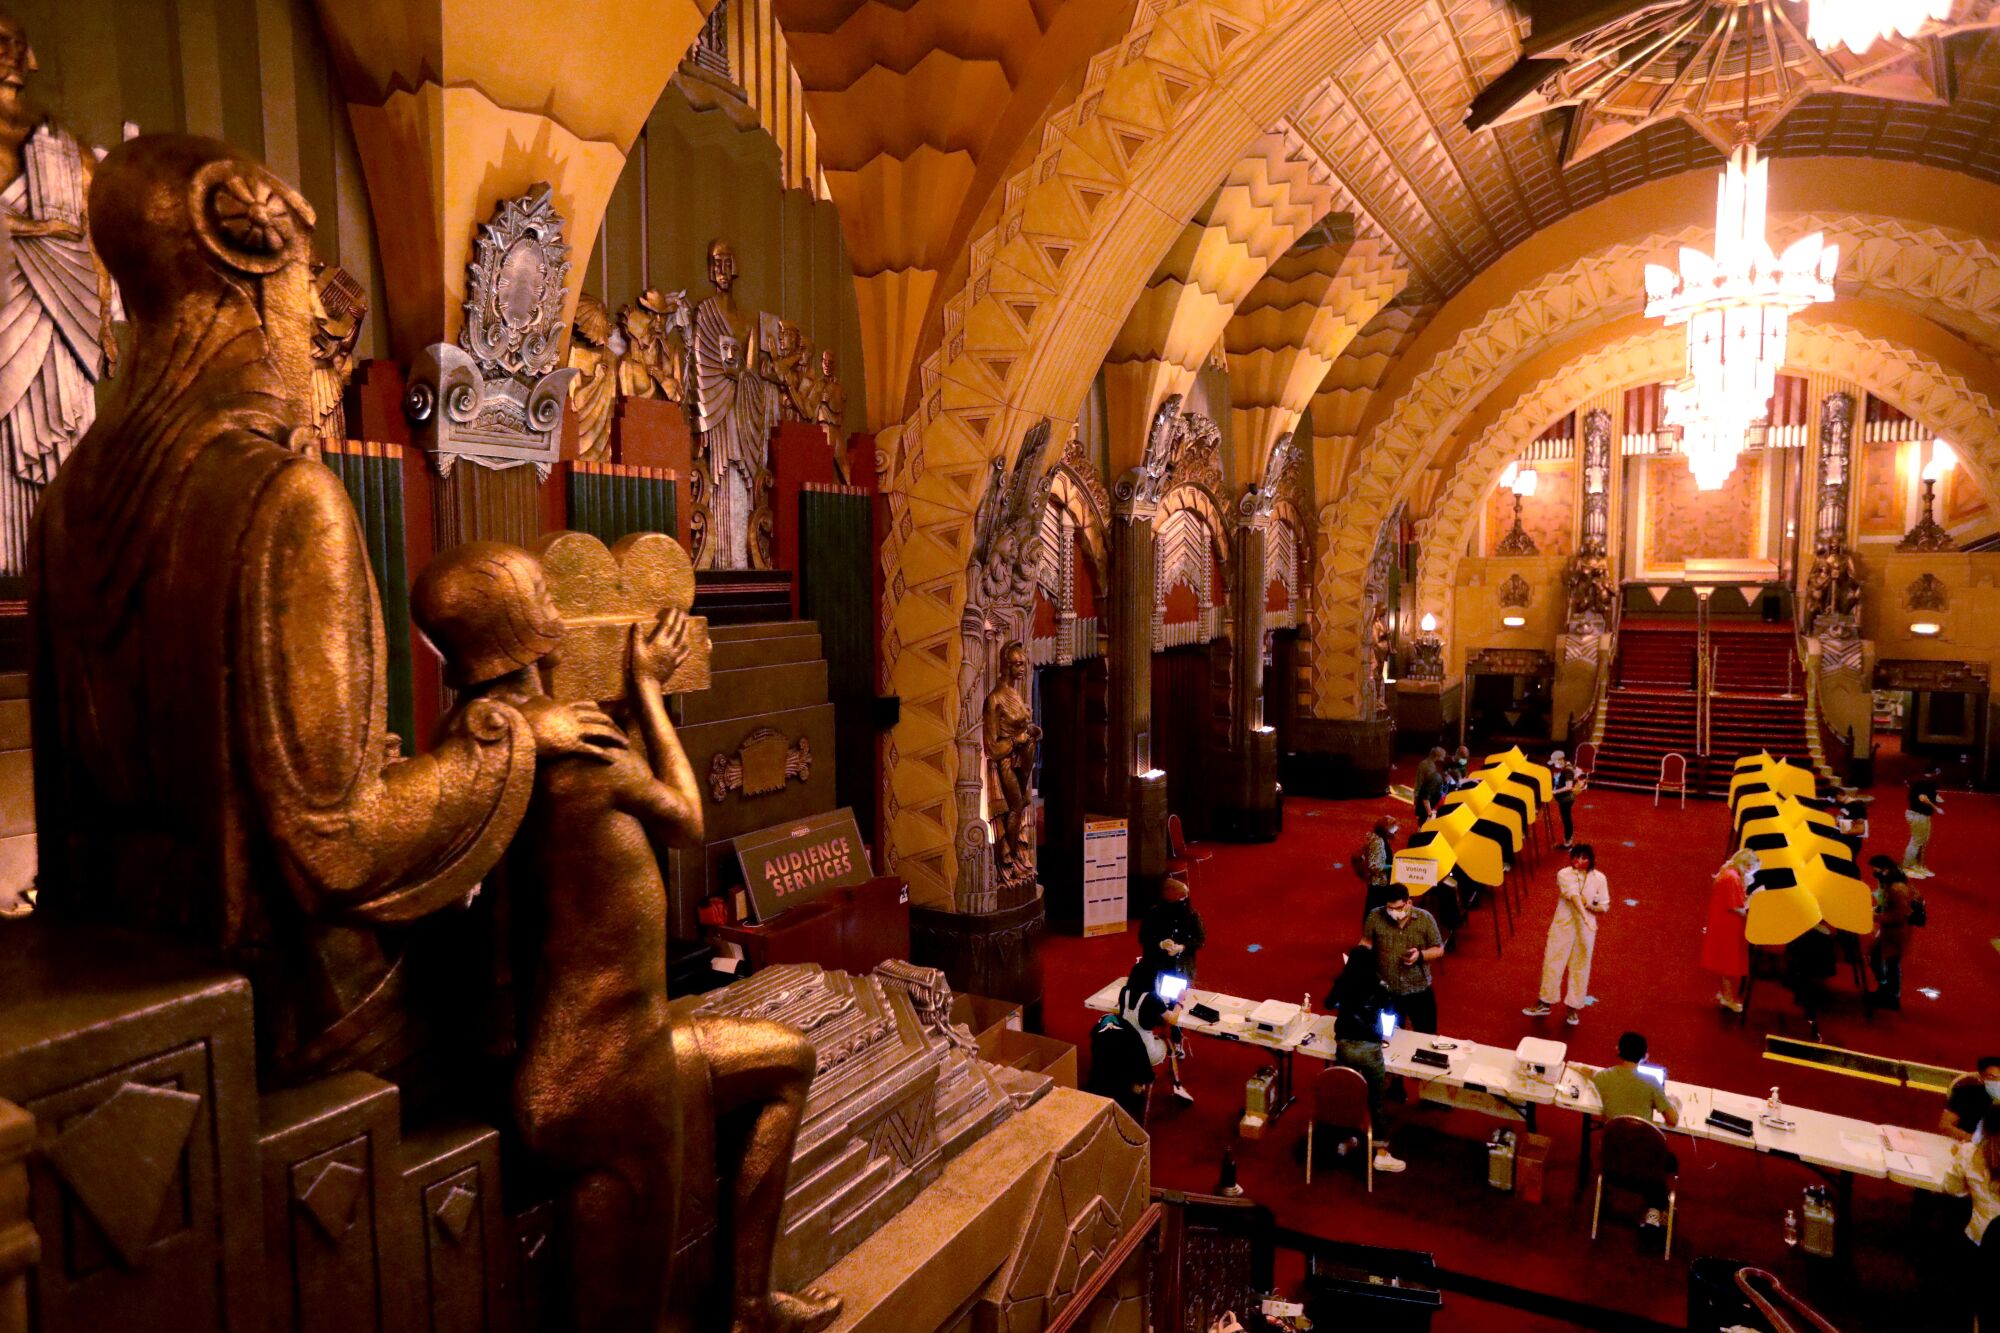 A statue seems to film voters who cast their ballots on election day at the Pantages Theatre in Hollywood.